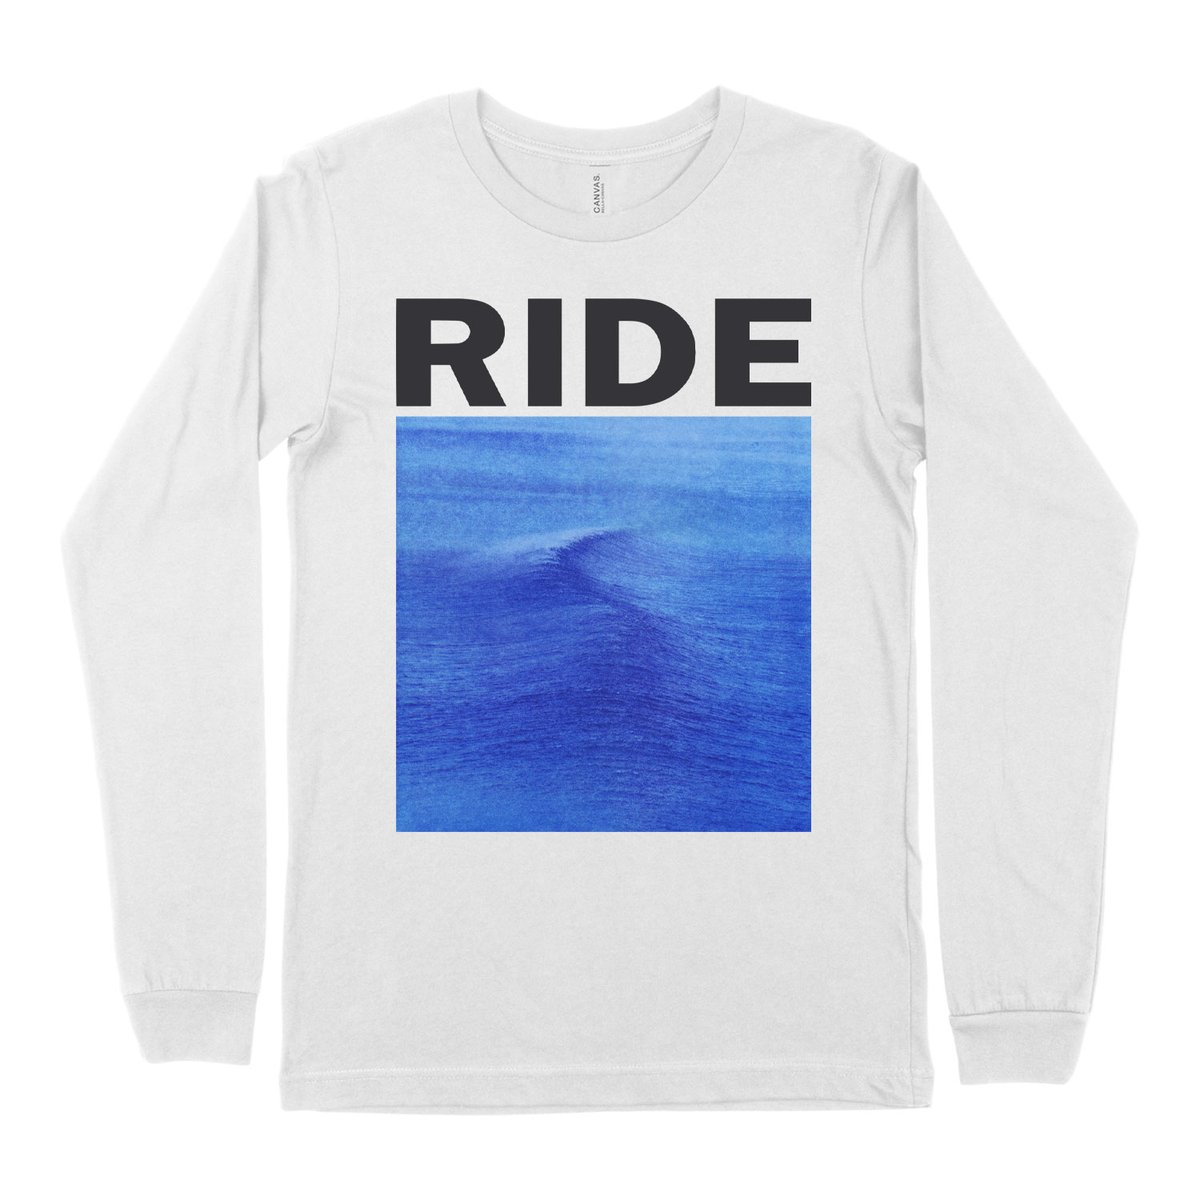 A brand new selection of merch items are now available to pre-order from our official store. 🔗 ride.nylonmerch.musicglue.store